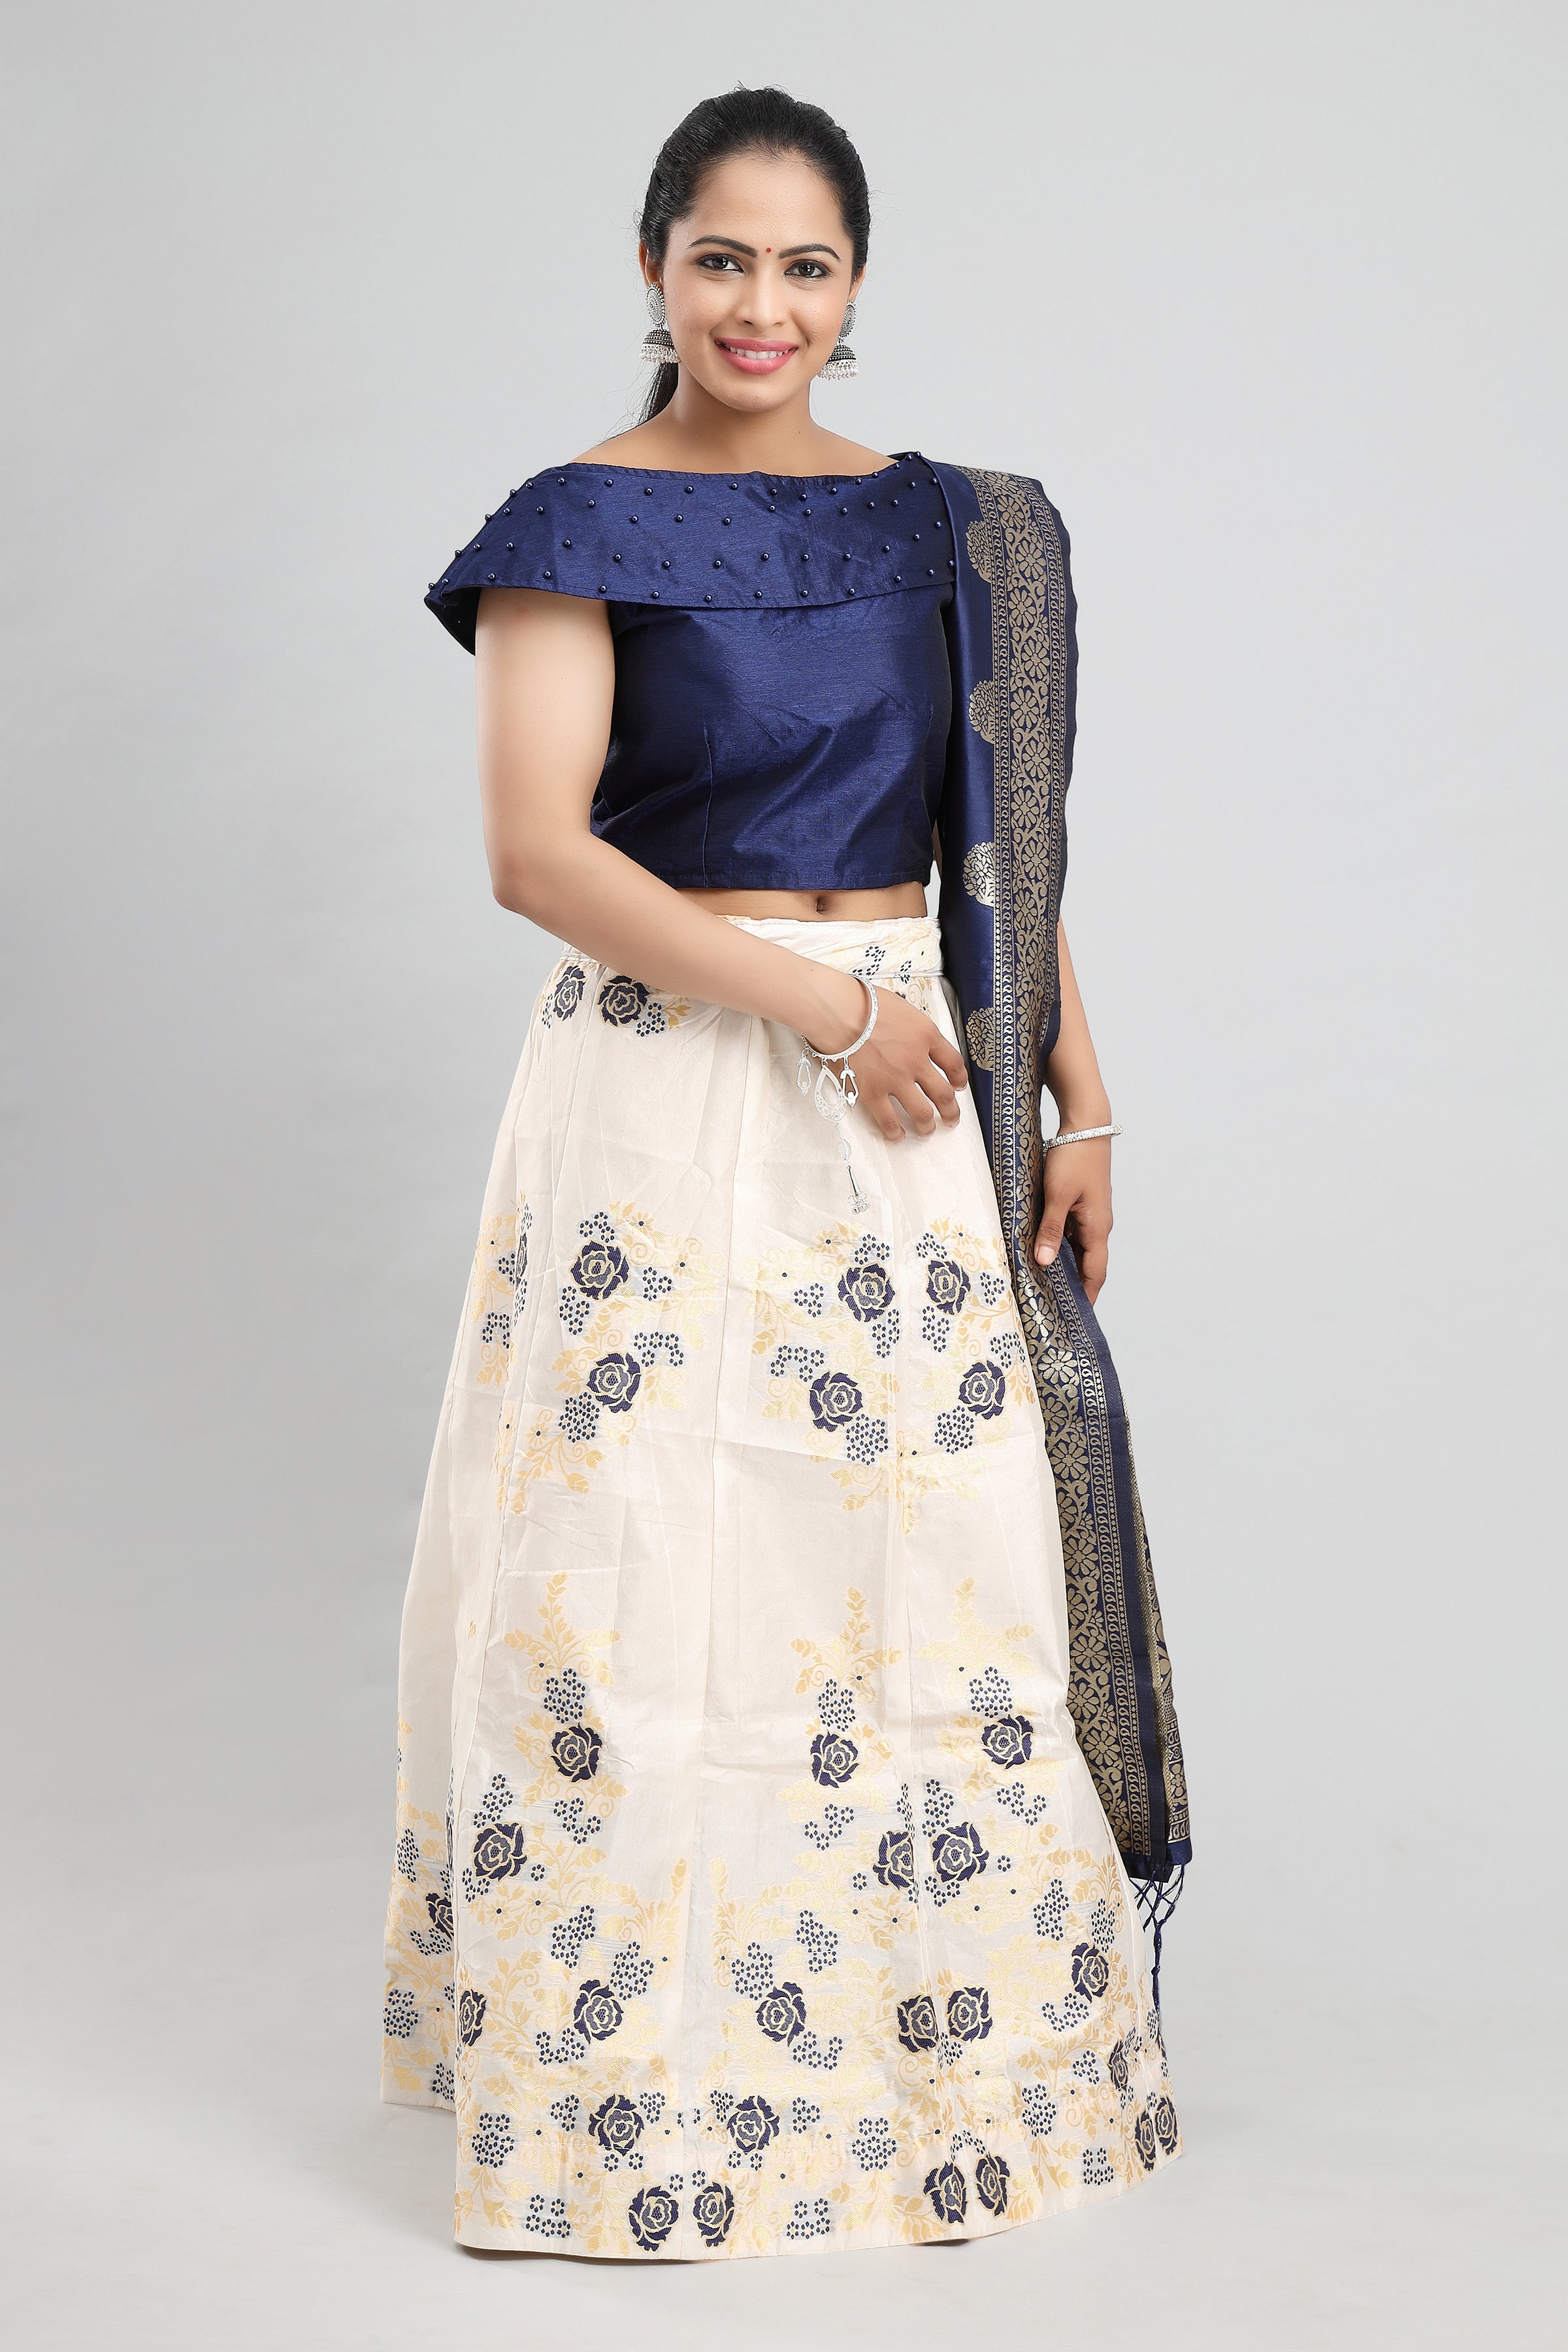 Buy Black Brocade Lehenga by Colorauction - Online shopping for Lehenga in  India